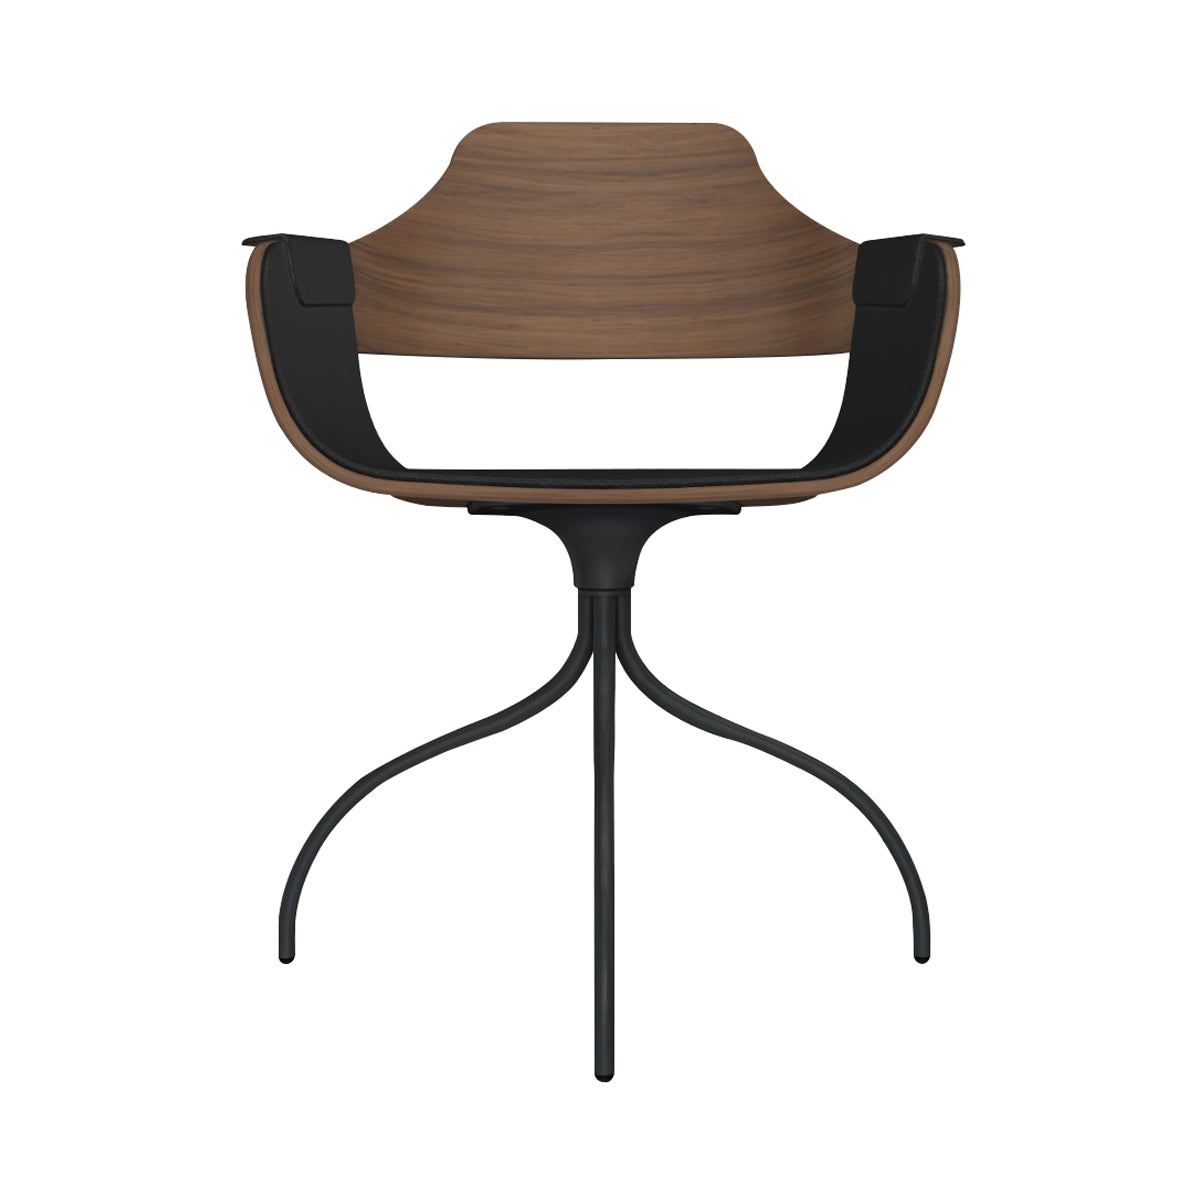 Showtime Chair with Swivel Base: Seat + Armrest Upholstered + Anthracite Grey + Walnut Nature Effect